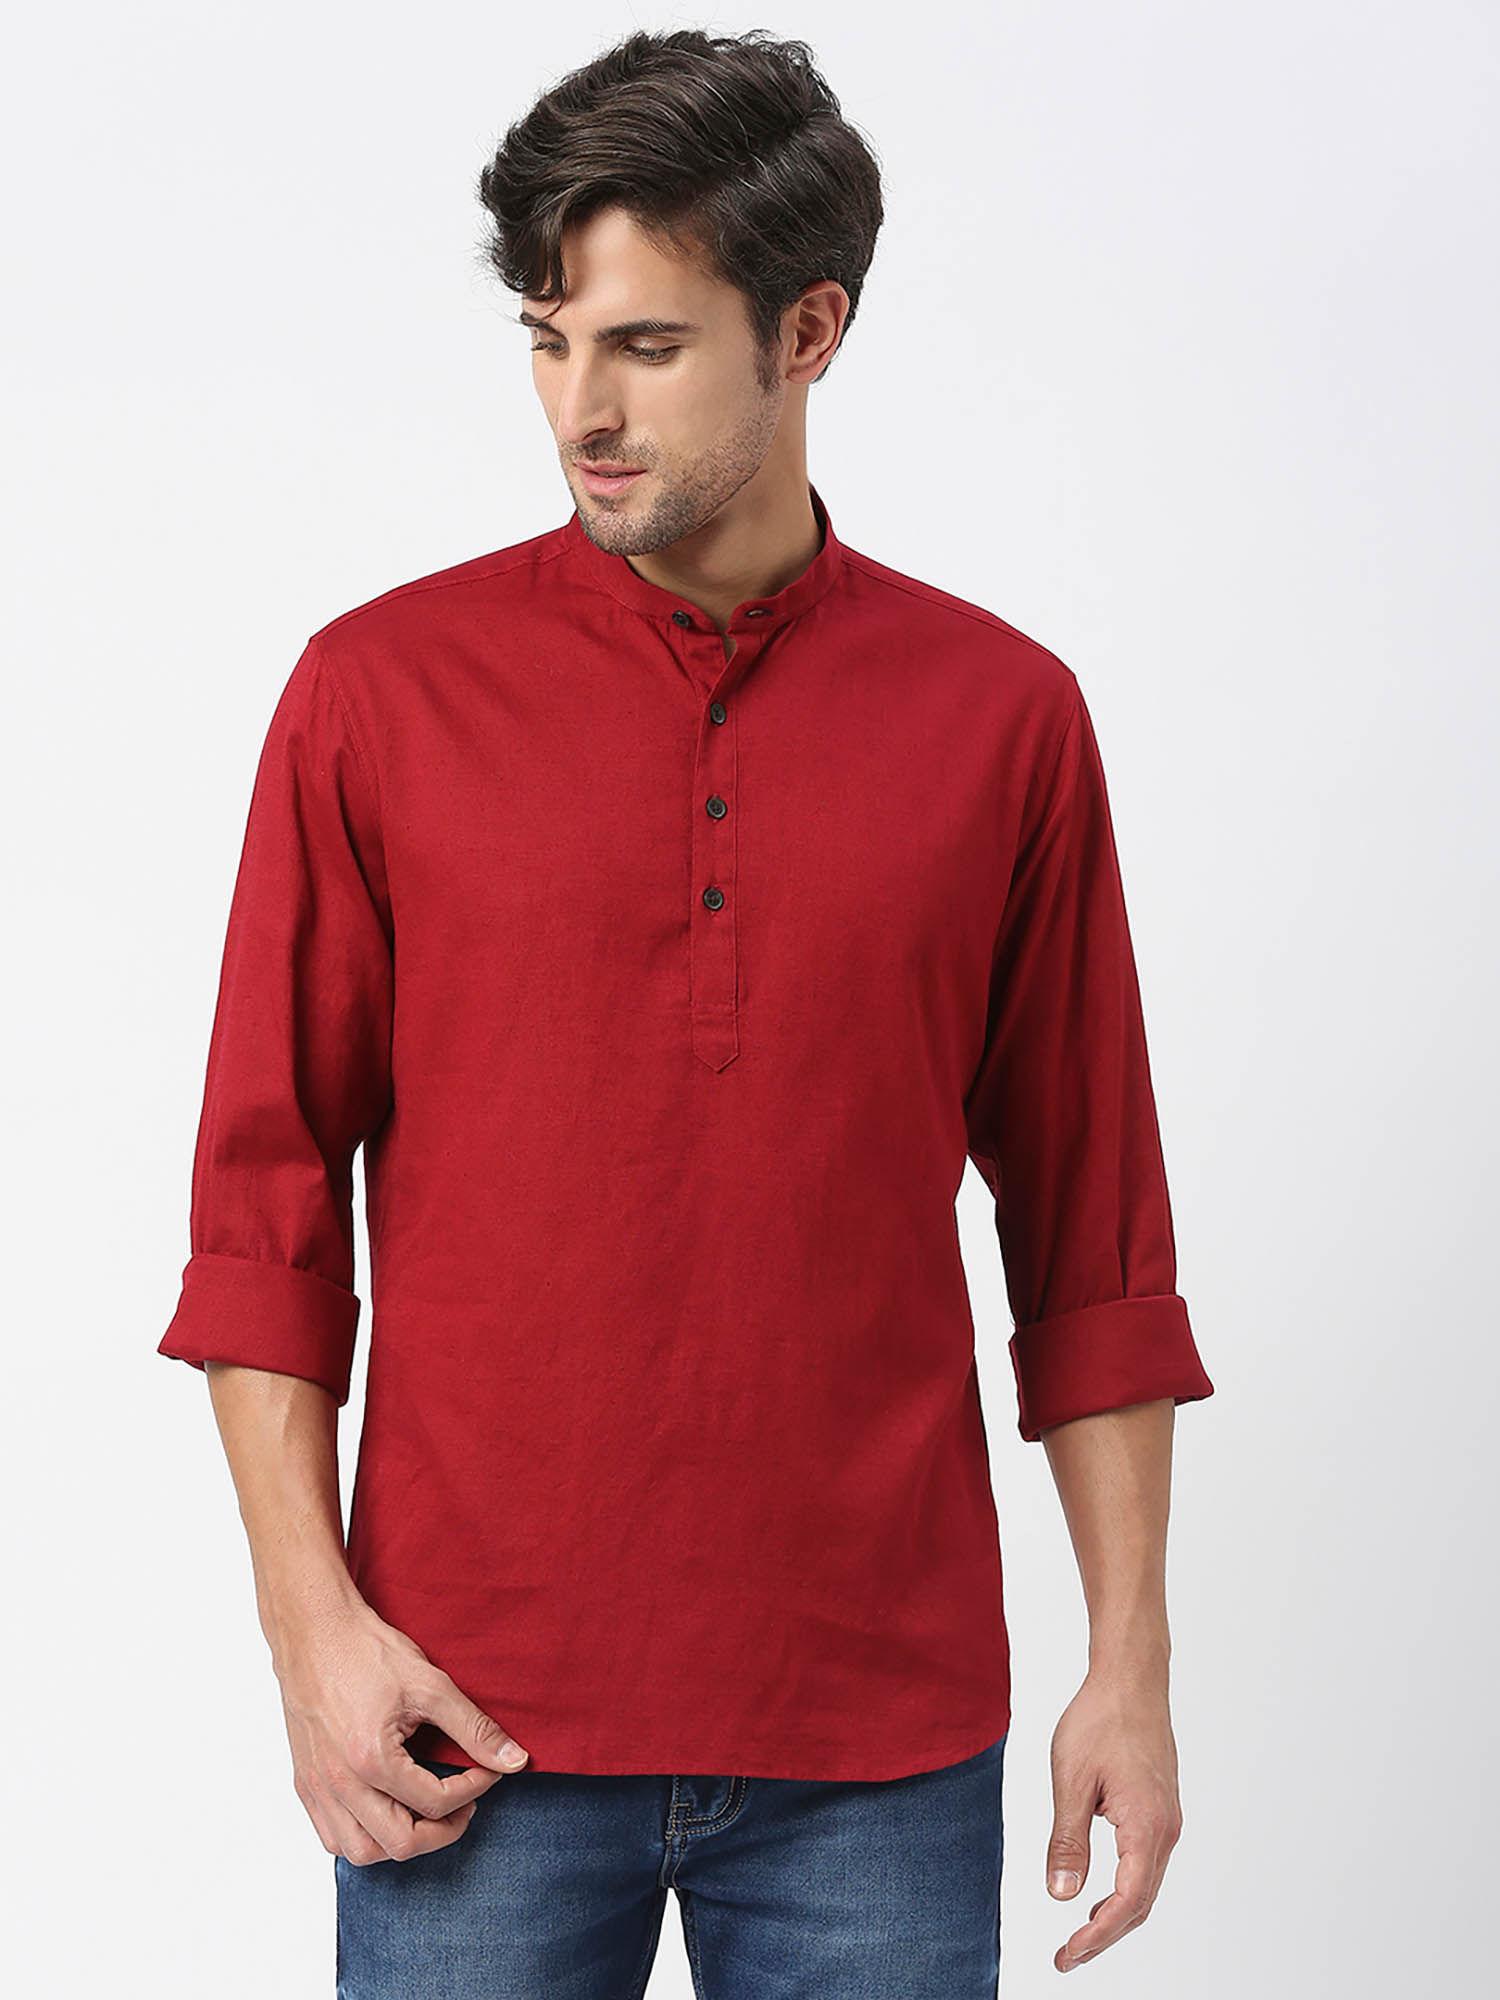 full sleeves red cotton linen kurta shirt with roll up sleeves